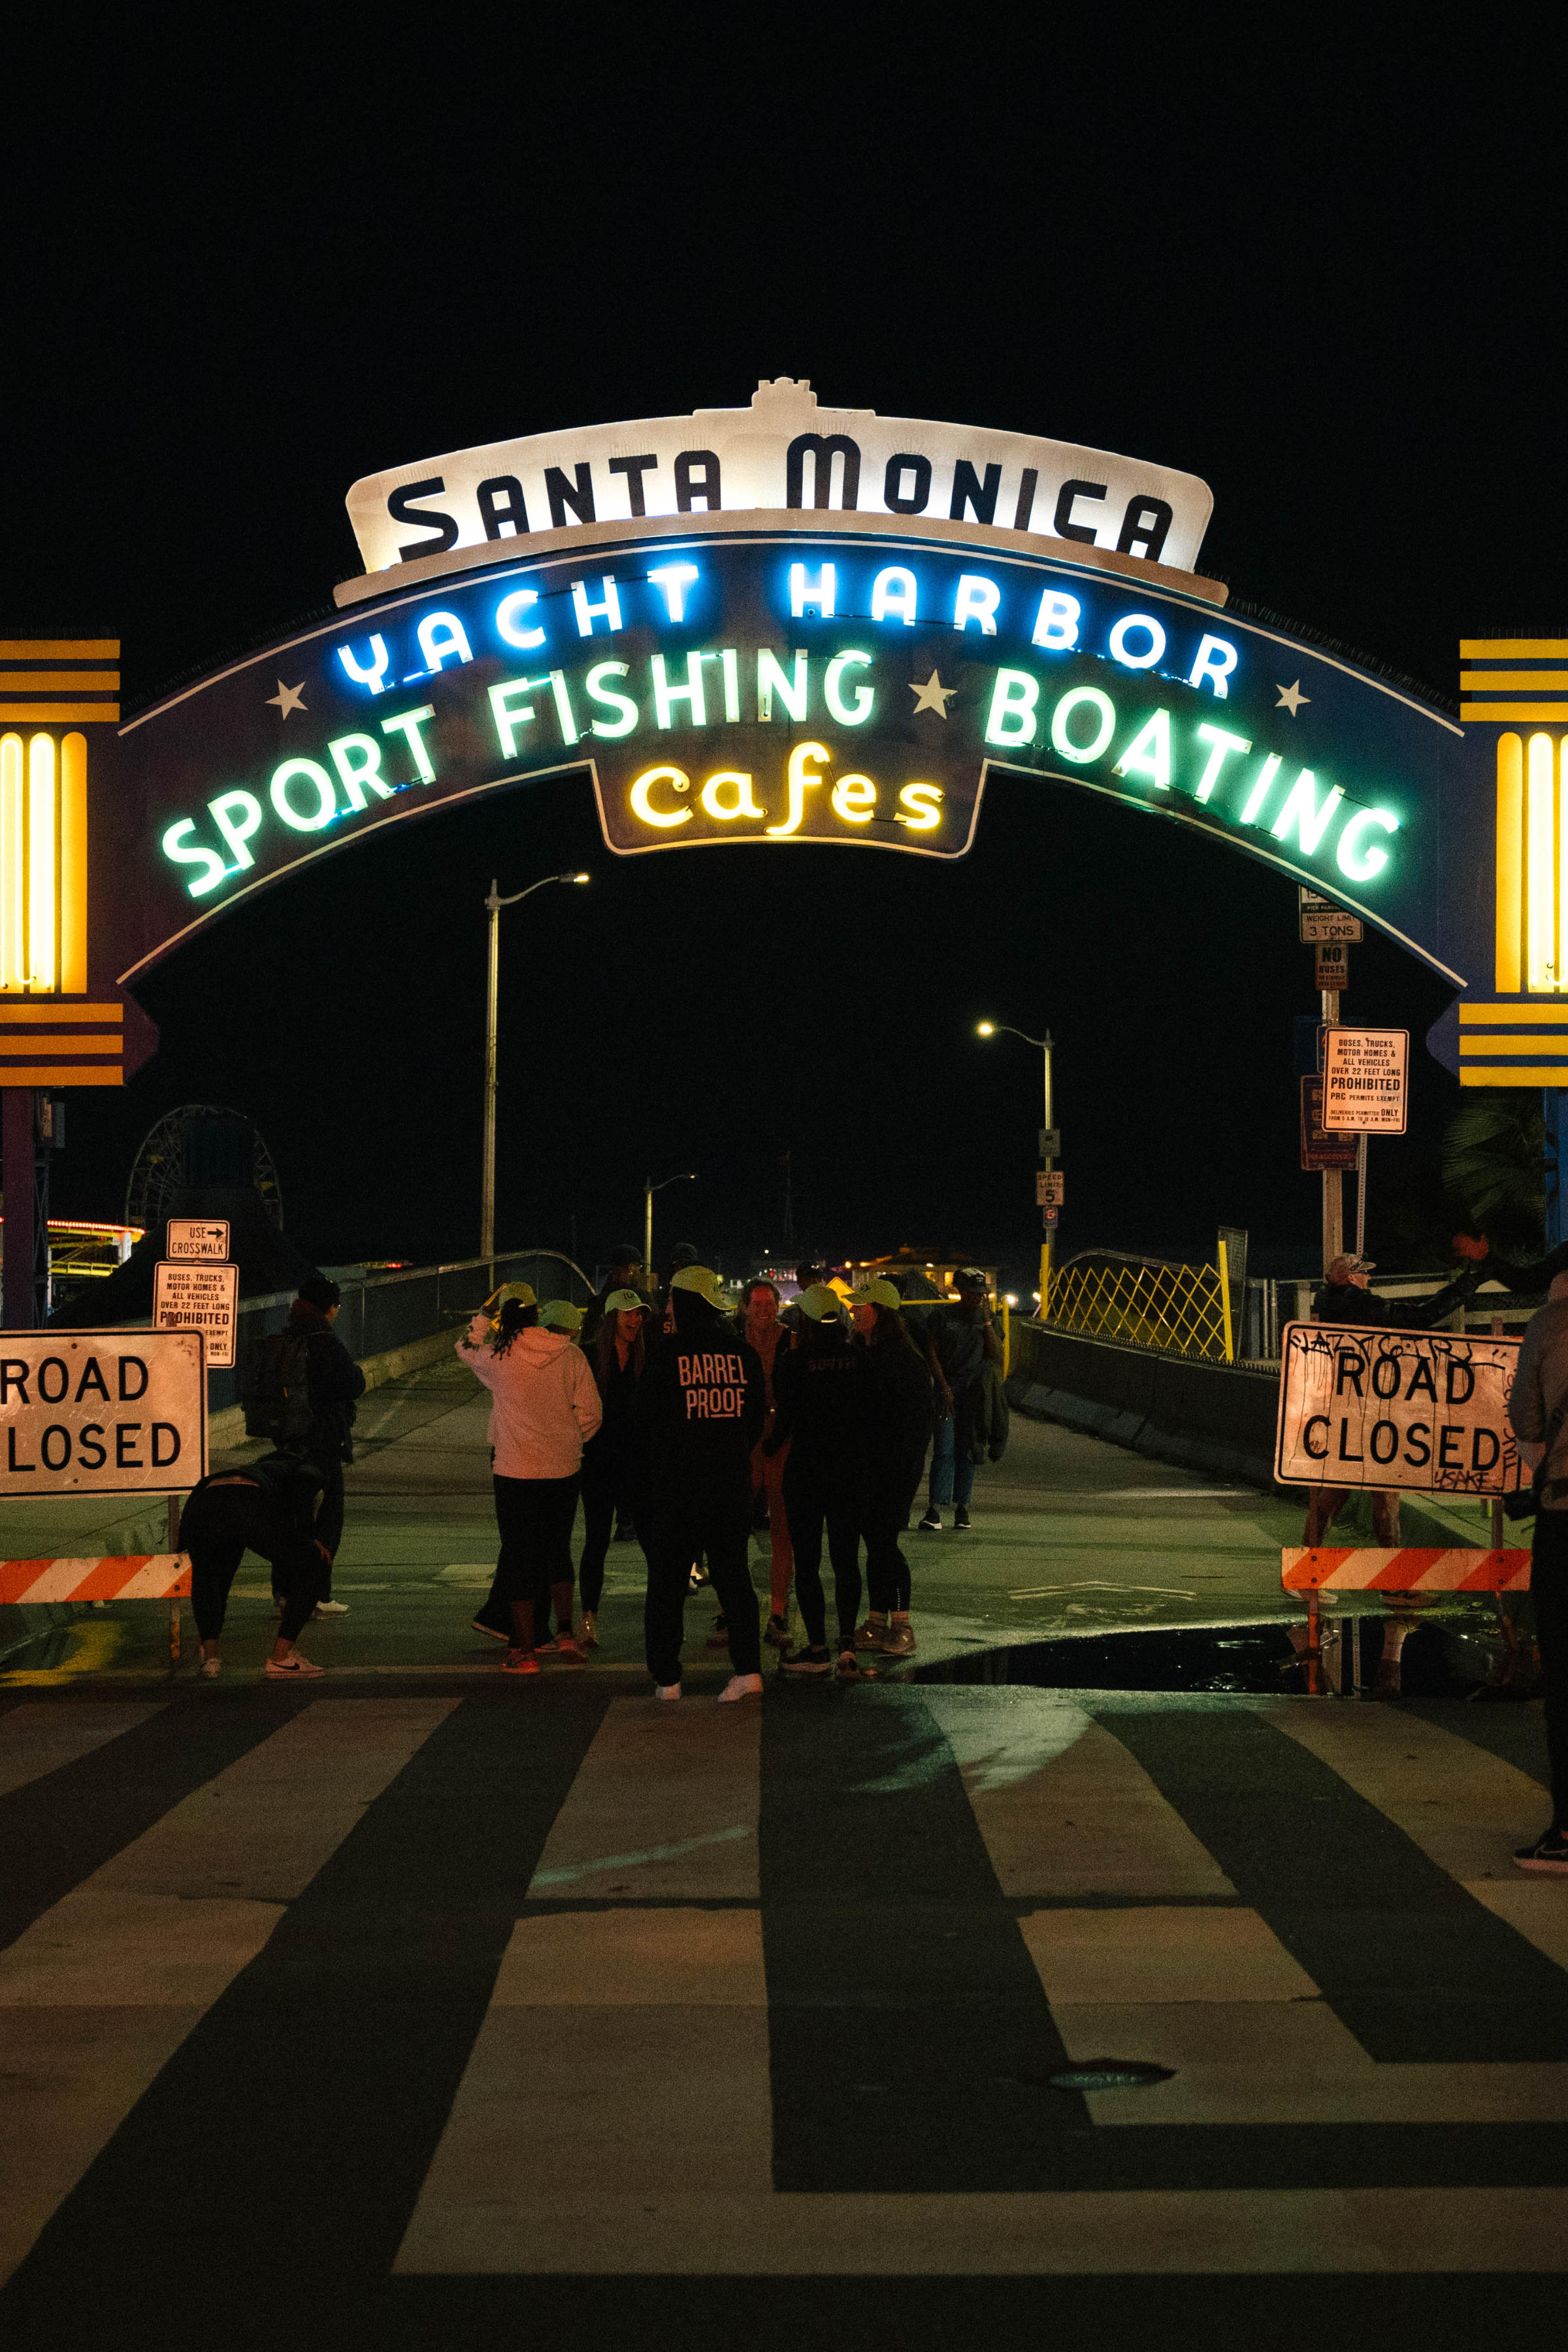 Welcome sign of Santa Monica at night with the road closed for a running race